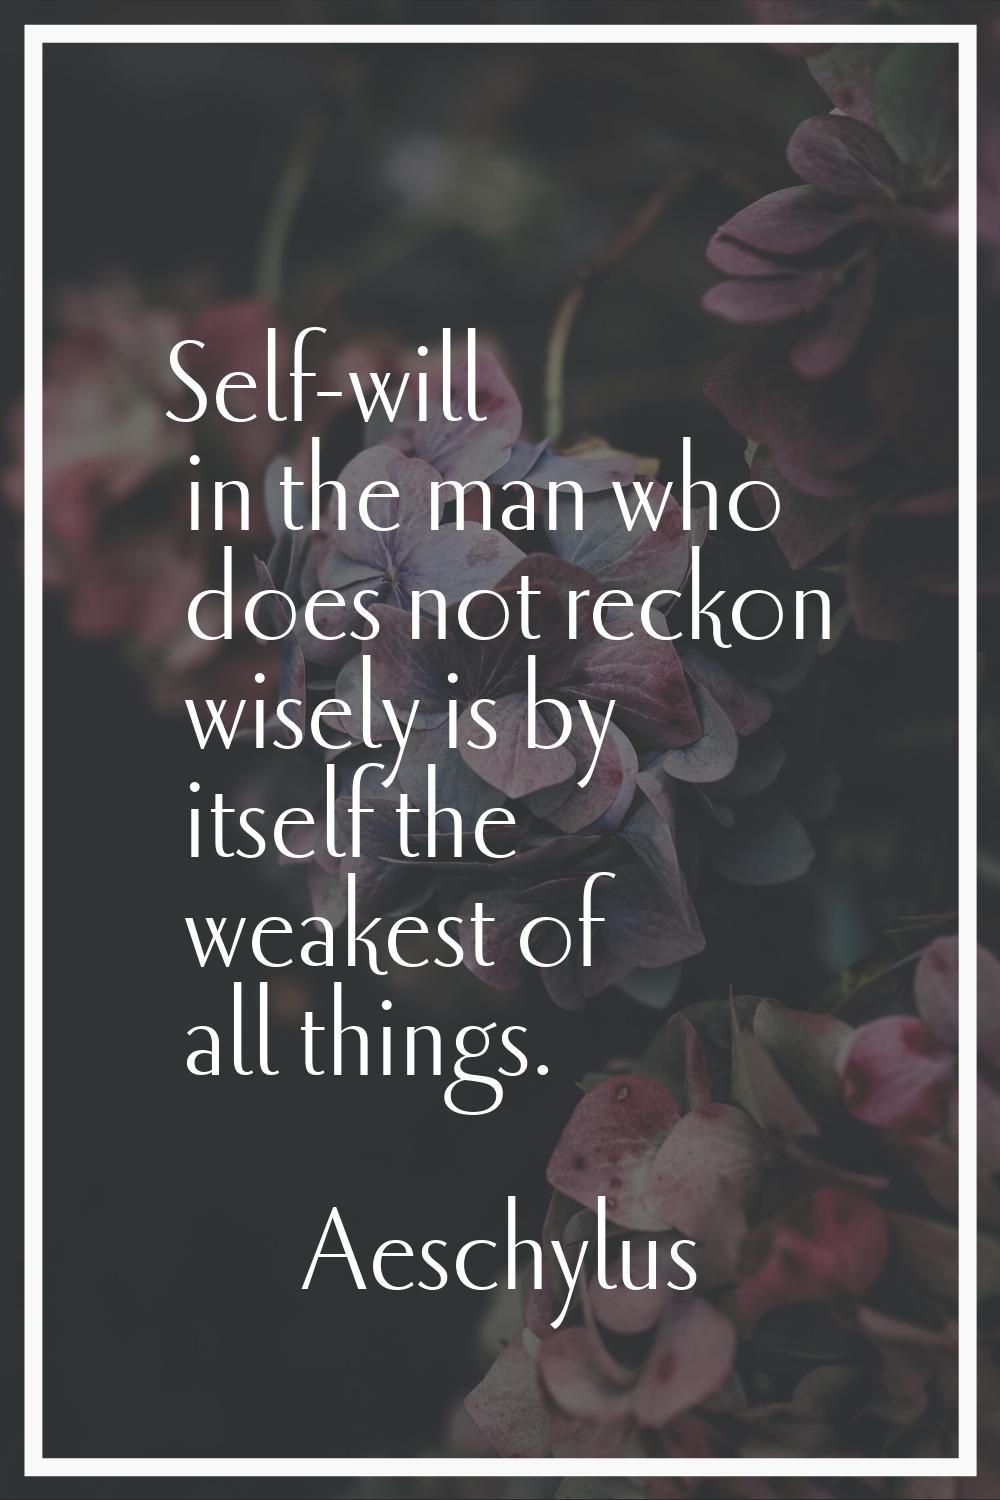 Self-will in the man who does not reckon wisely is by itself the weakest of all things.